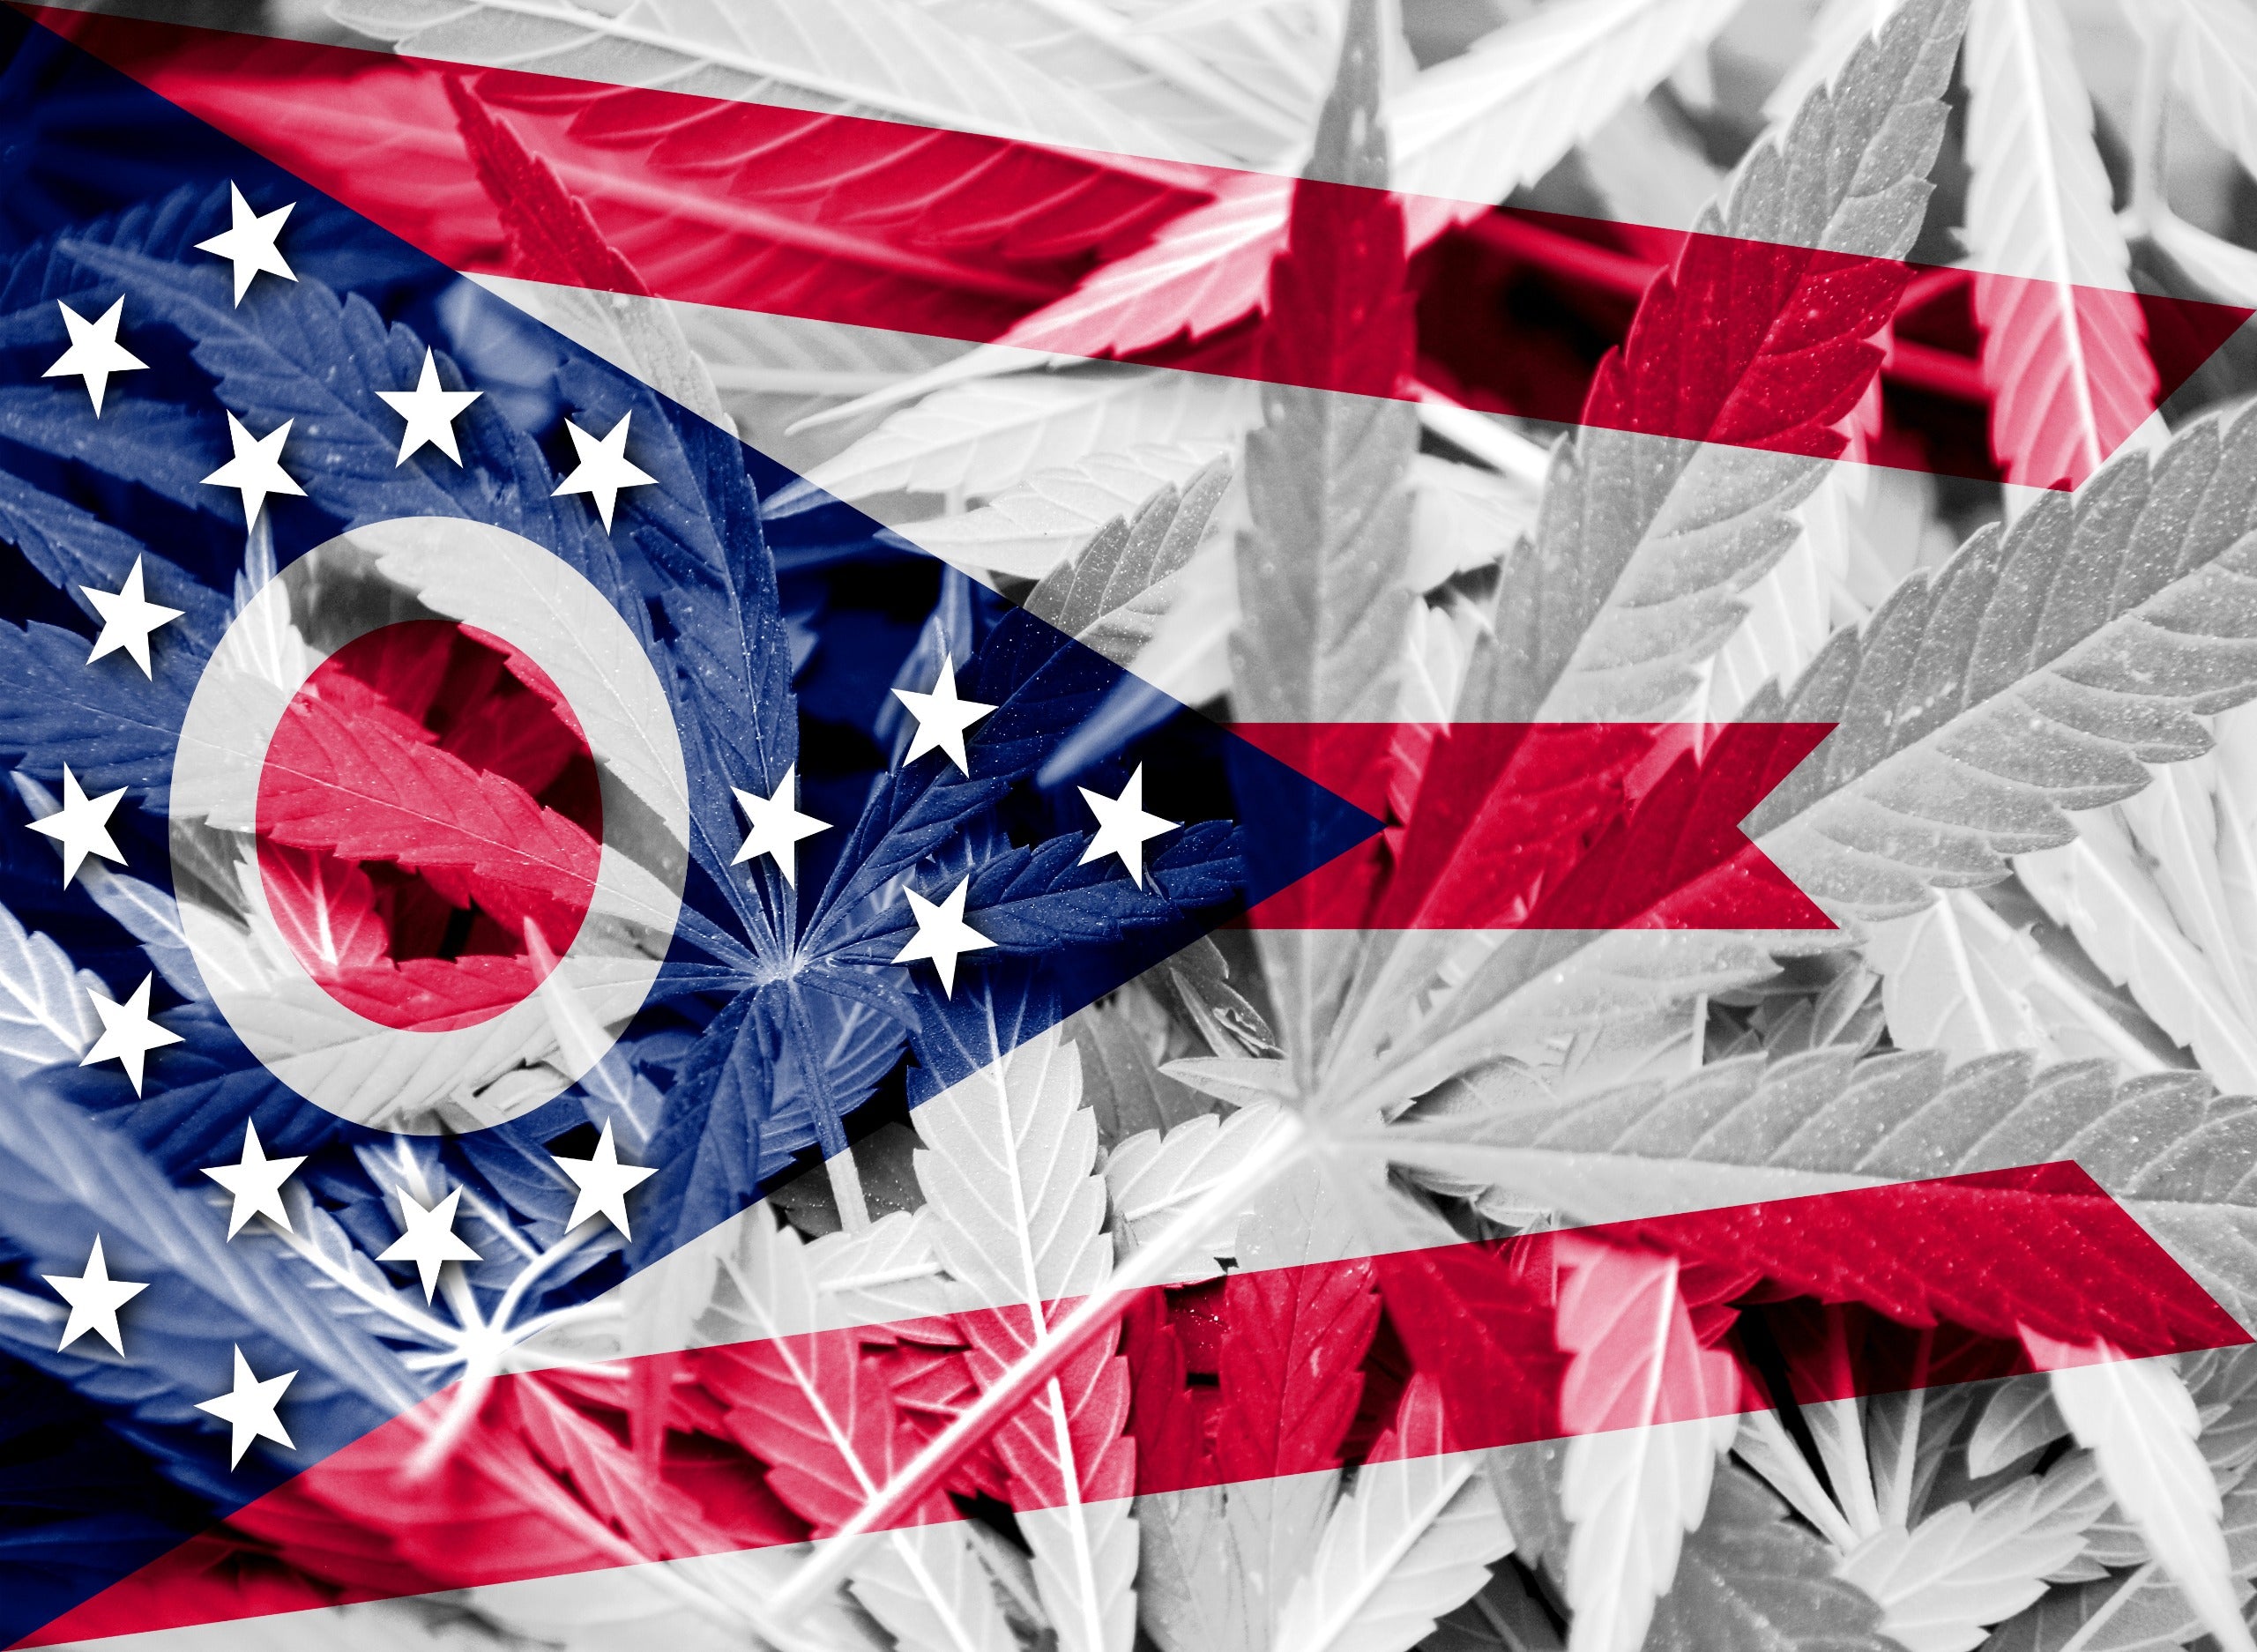 Ohioans Vote to Legalize Recreational Cannabis